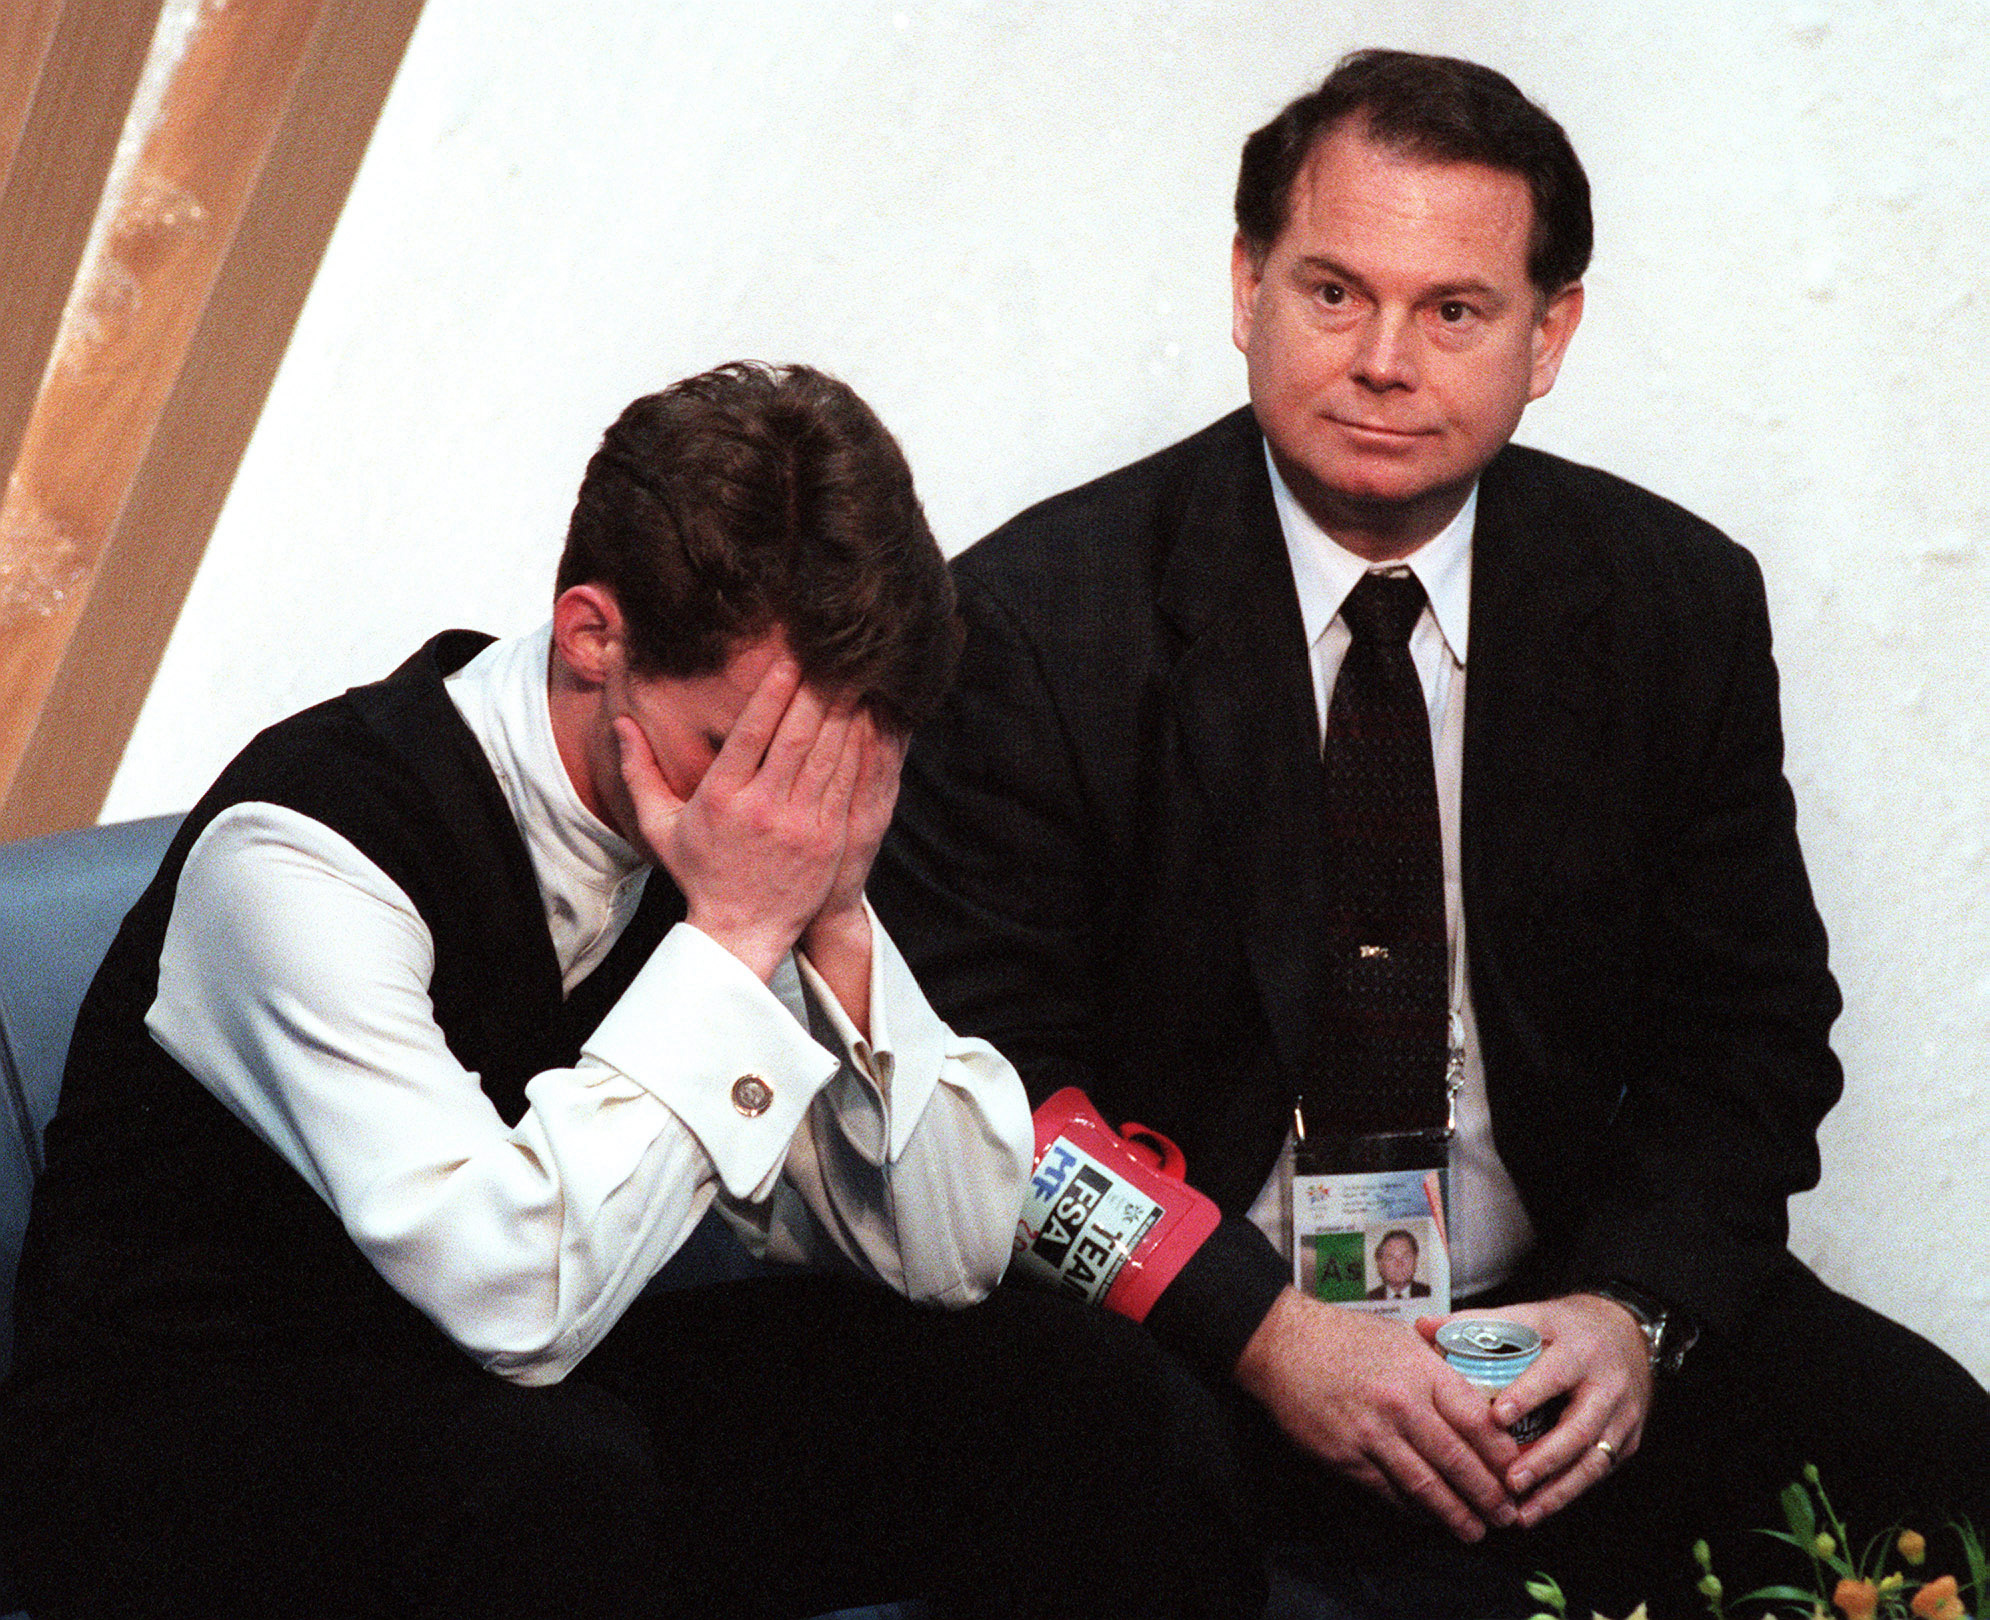 PHOTO: Figure skating coach Richard Callaghan is pictured at the finals of the men's figure skating competition at the 1998 Winter Olympics in Nagano, Japan.